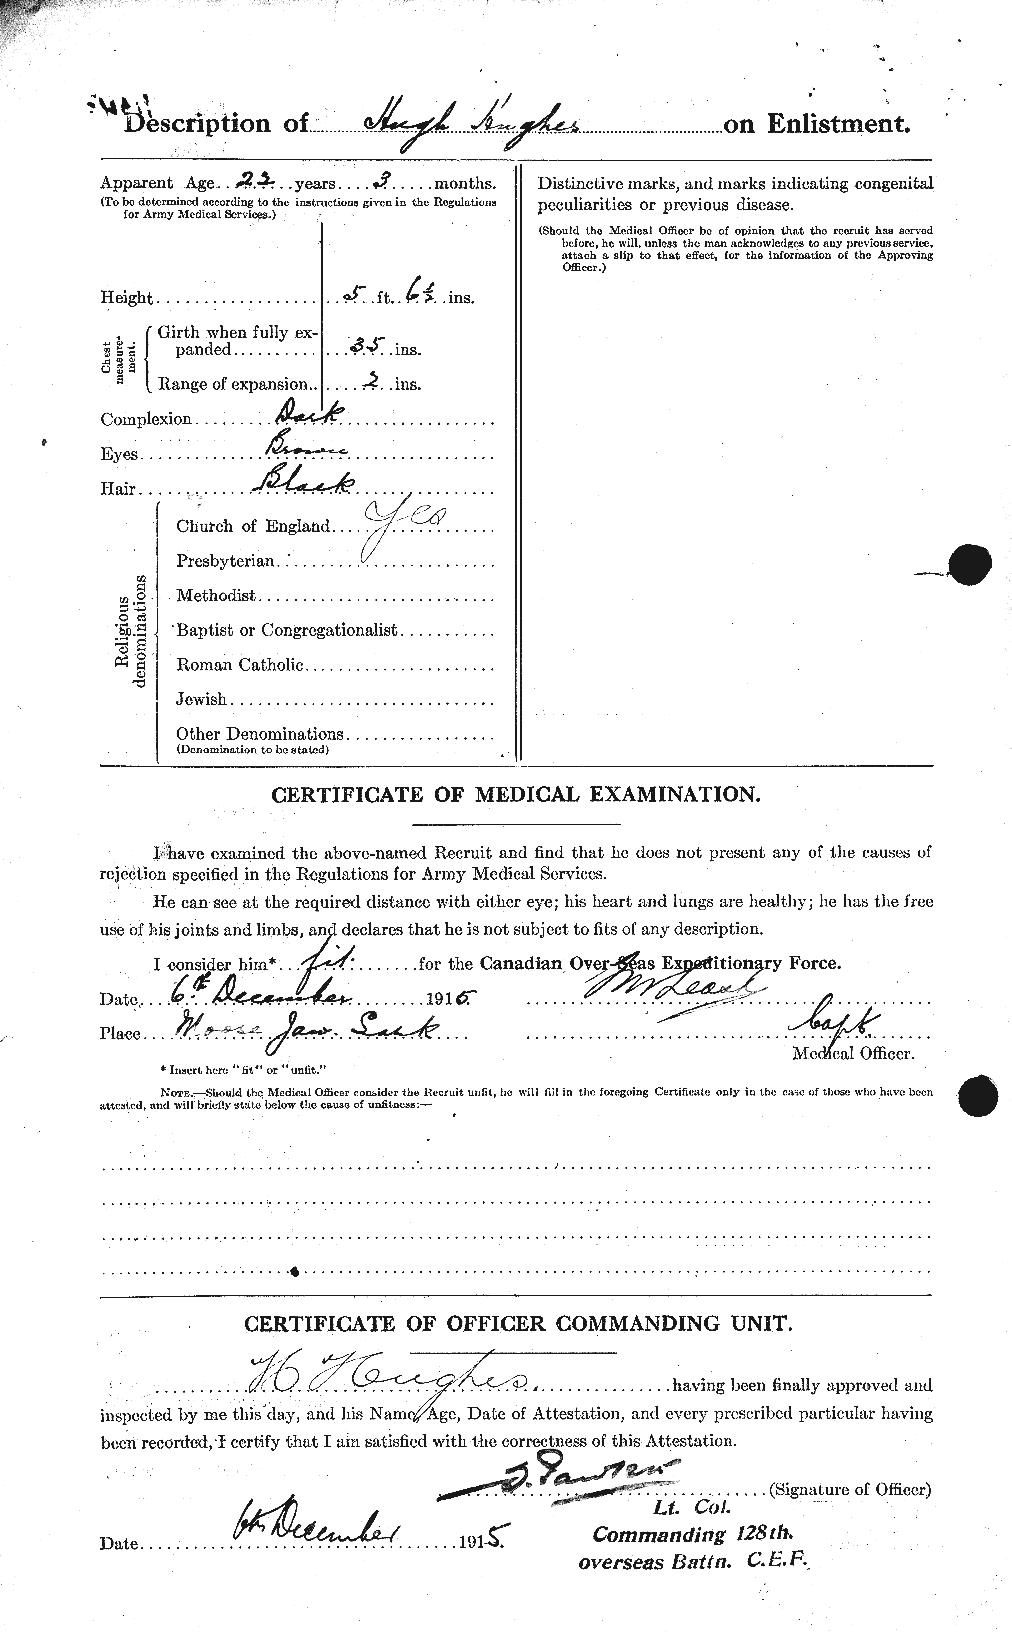 Personnel Records of the First World War - CEF 403917b